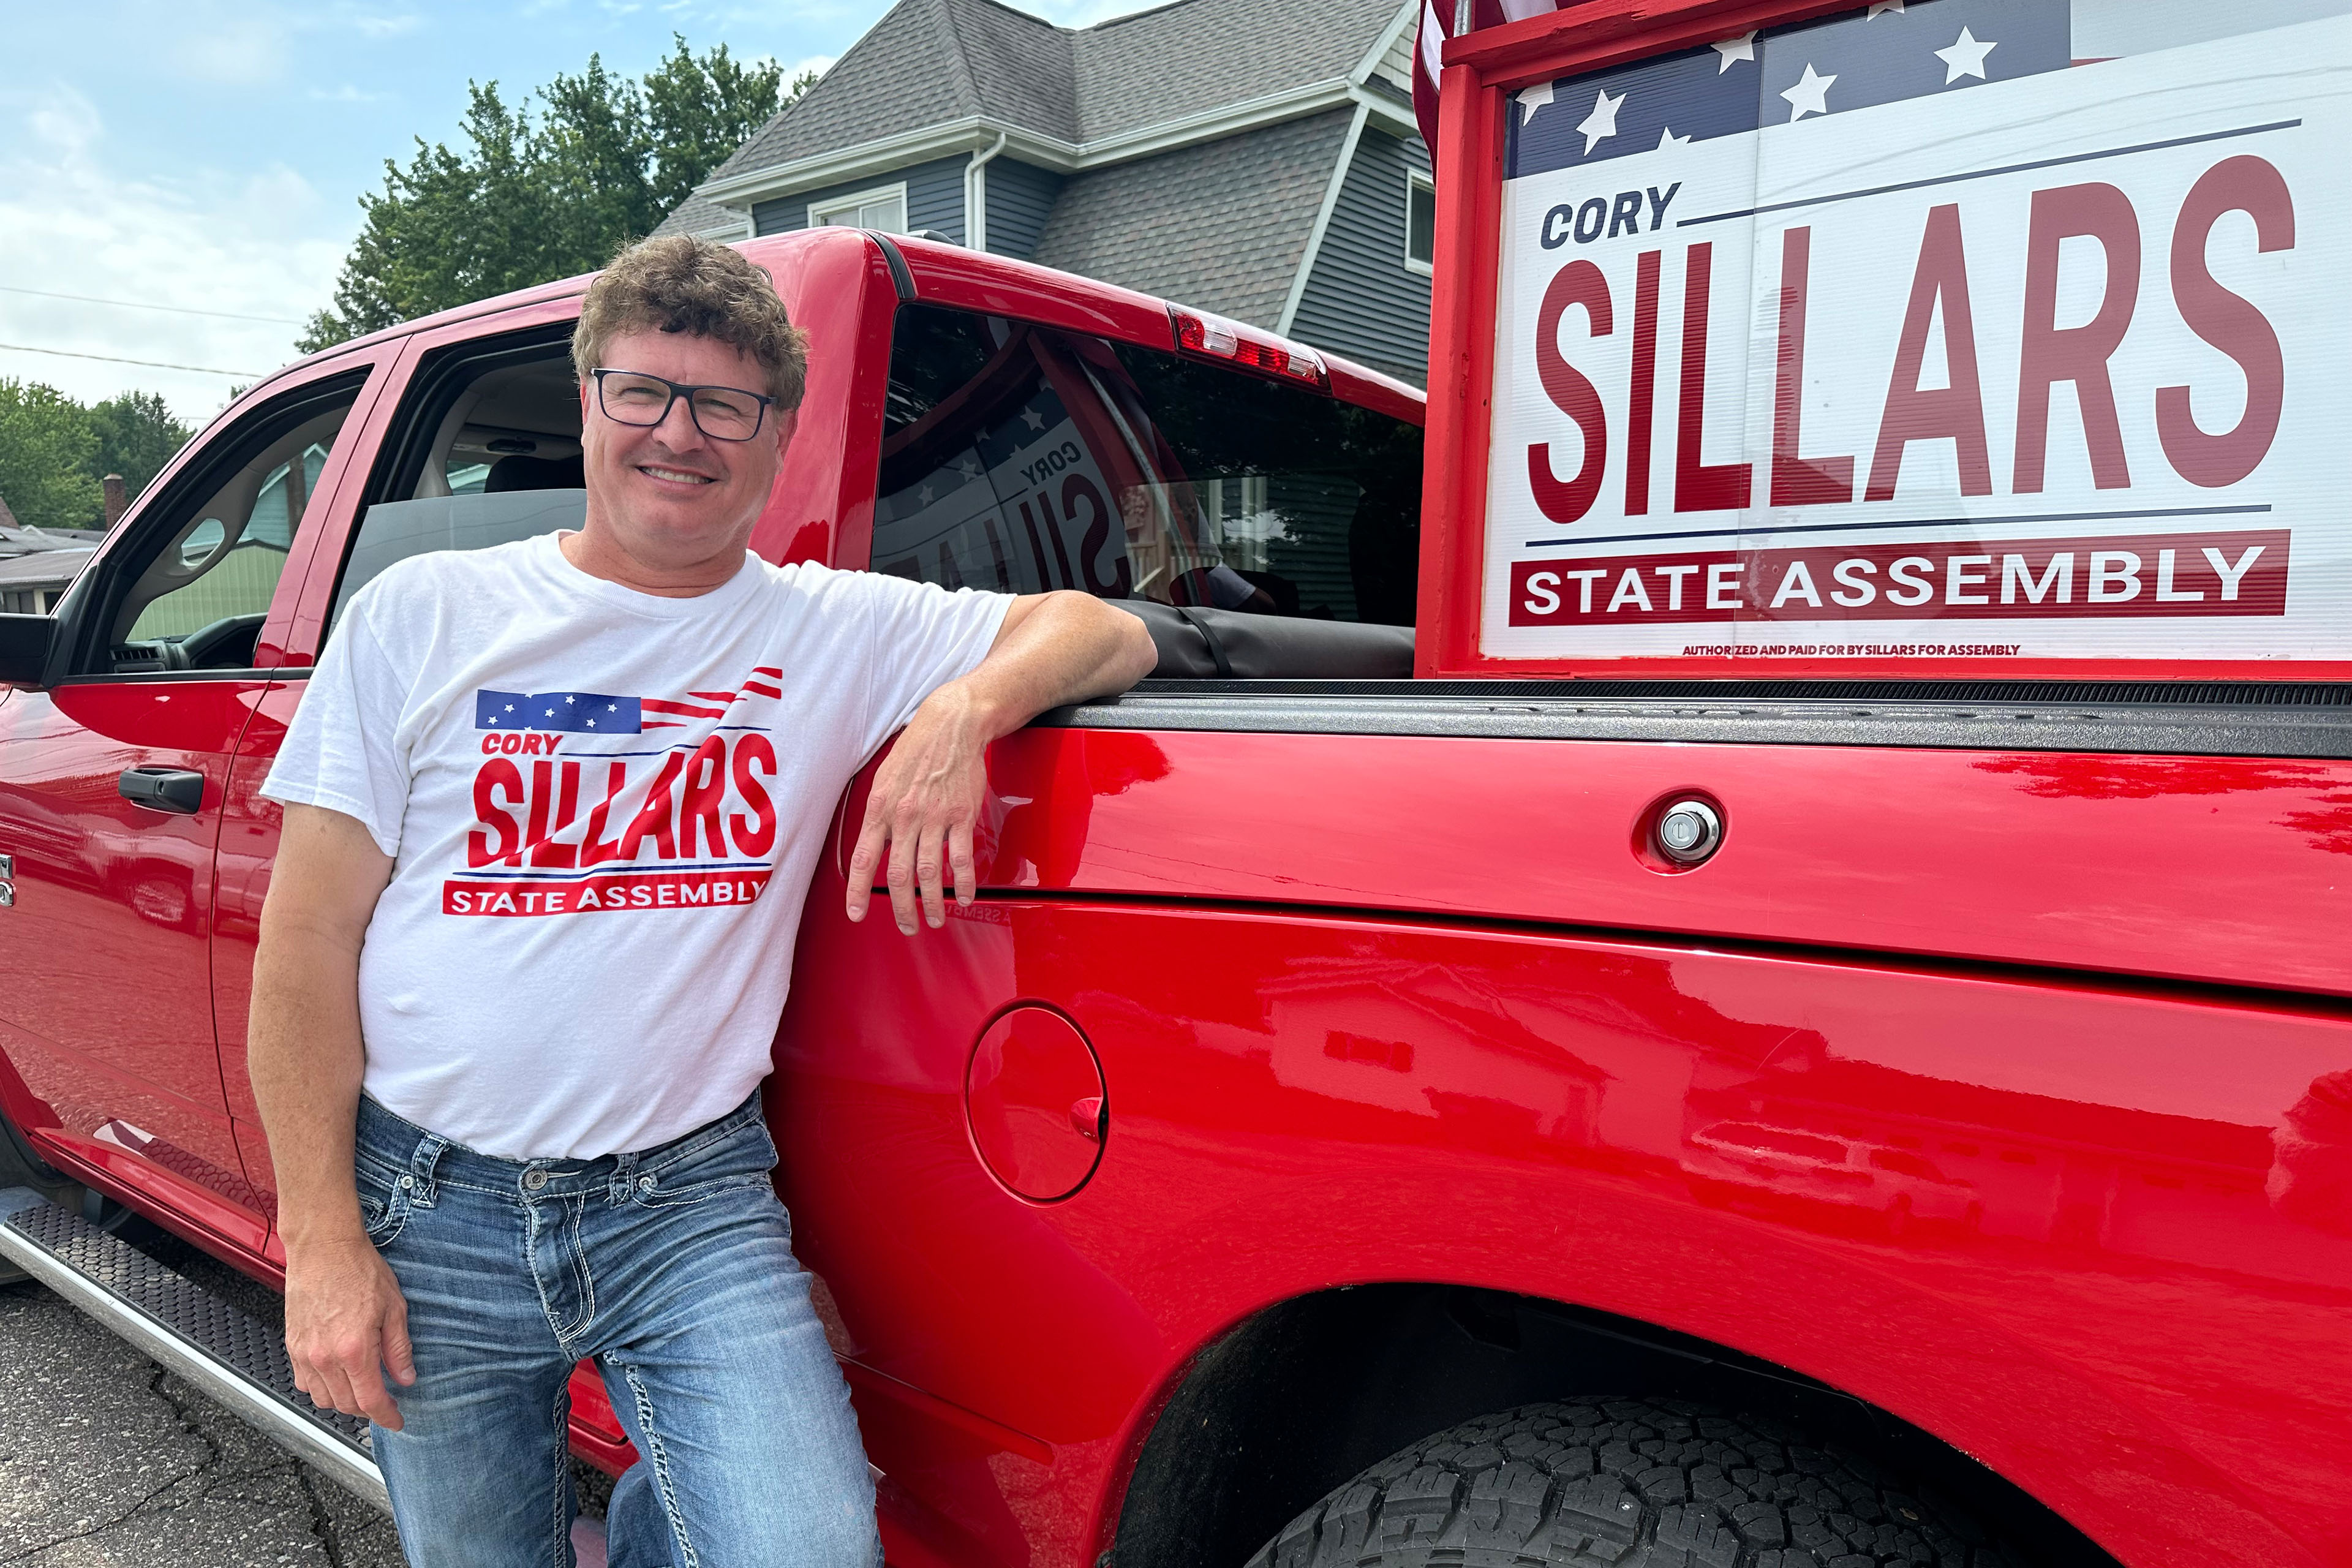 Cory Sillars, a Republican candidate for the Wisconsin State Assembly, stands beside a bright red truck. There is a campaign sign with his last name attached to the back of the truck.